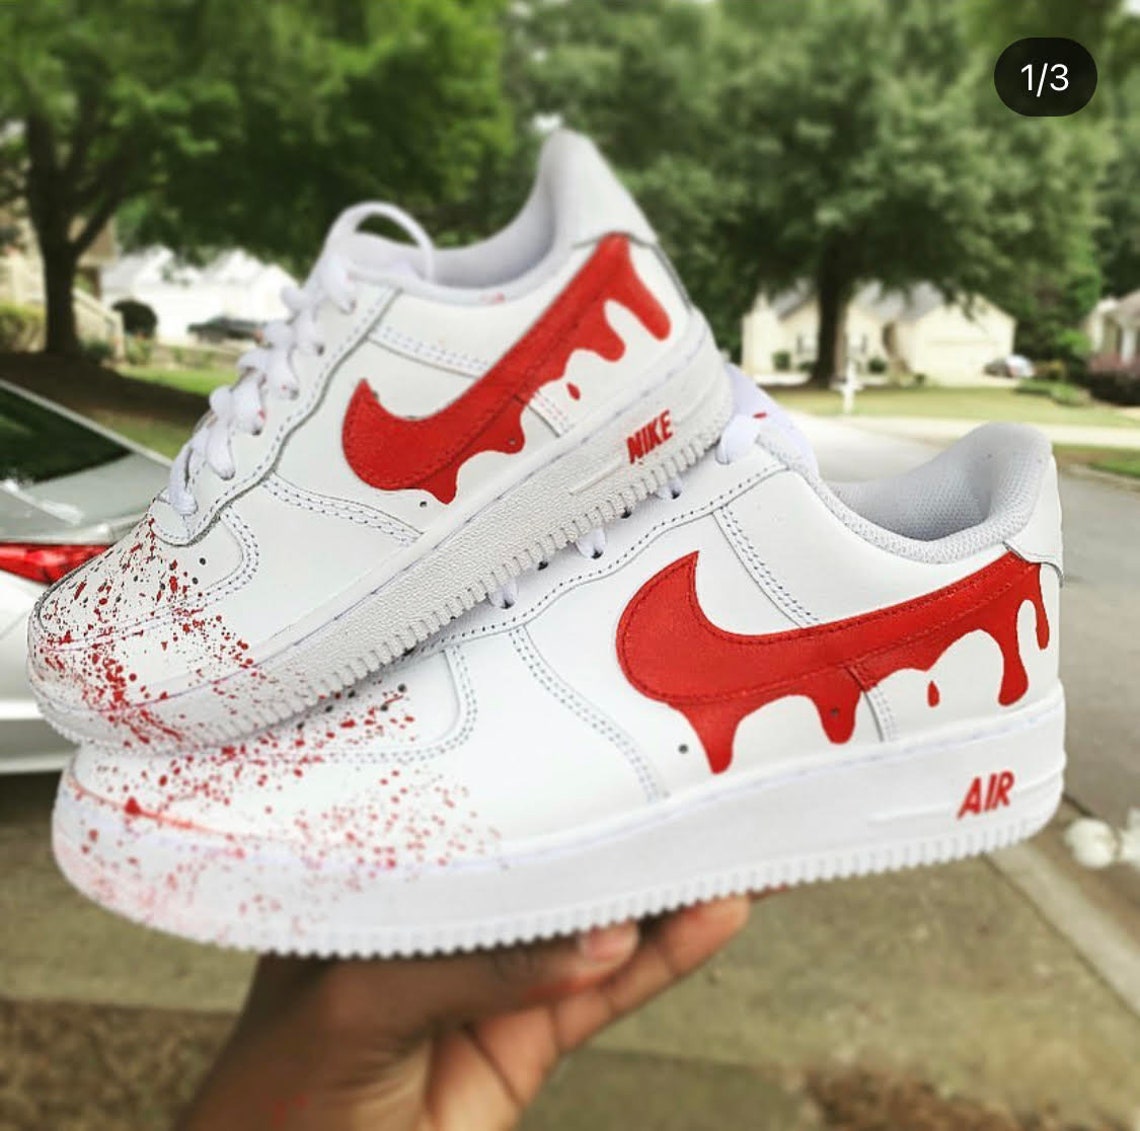 Custom Drip air force 1 made to order | Etsy